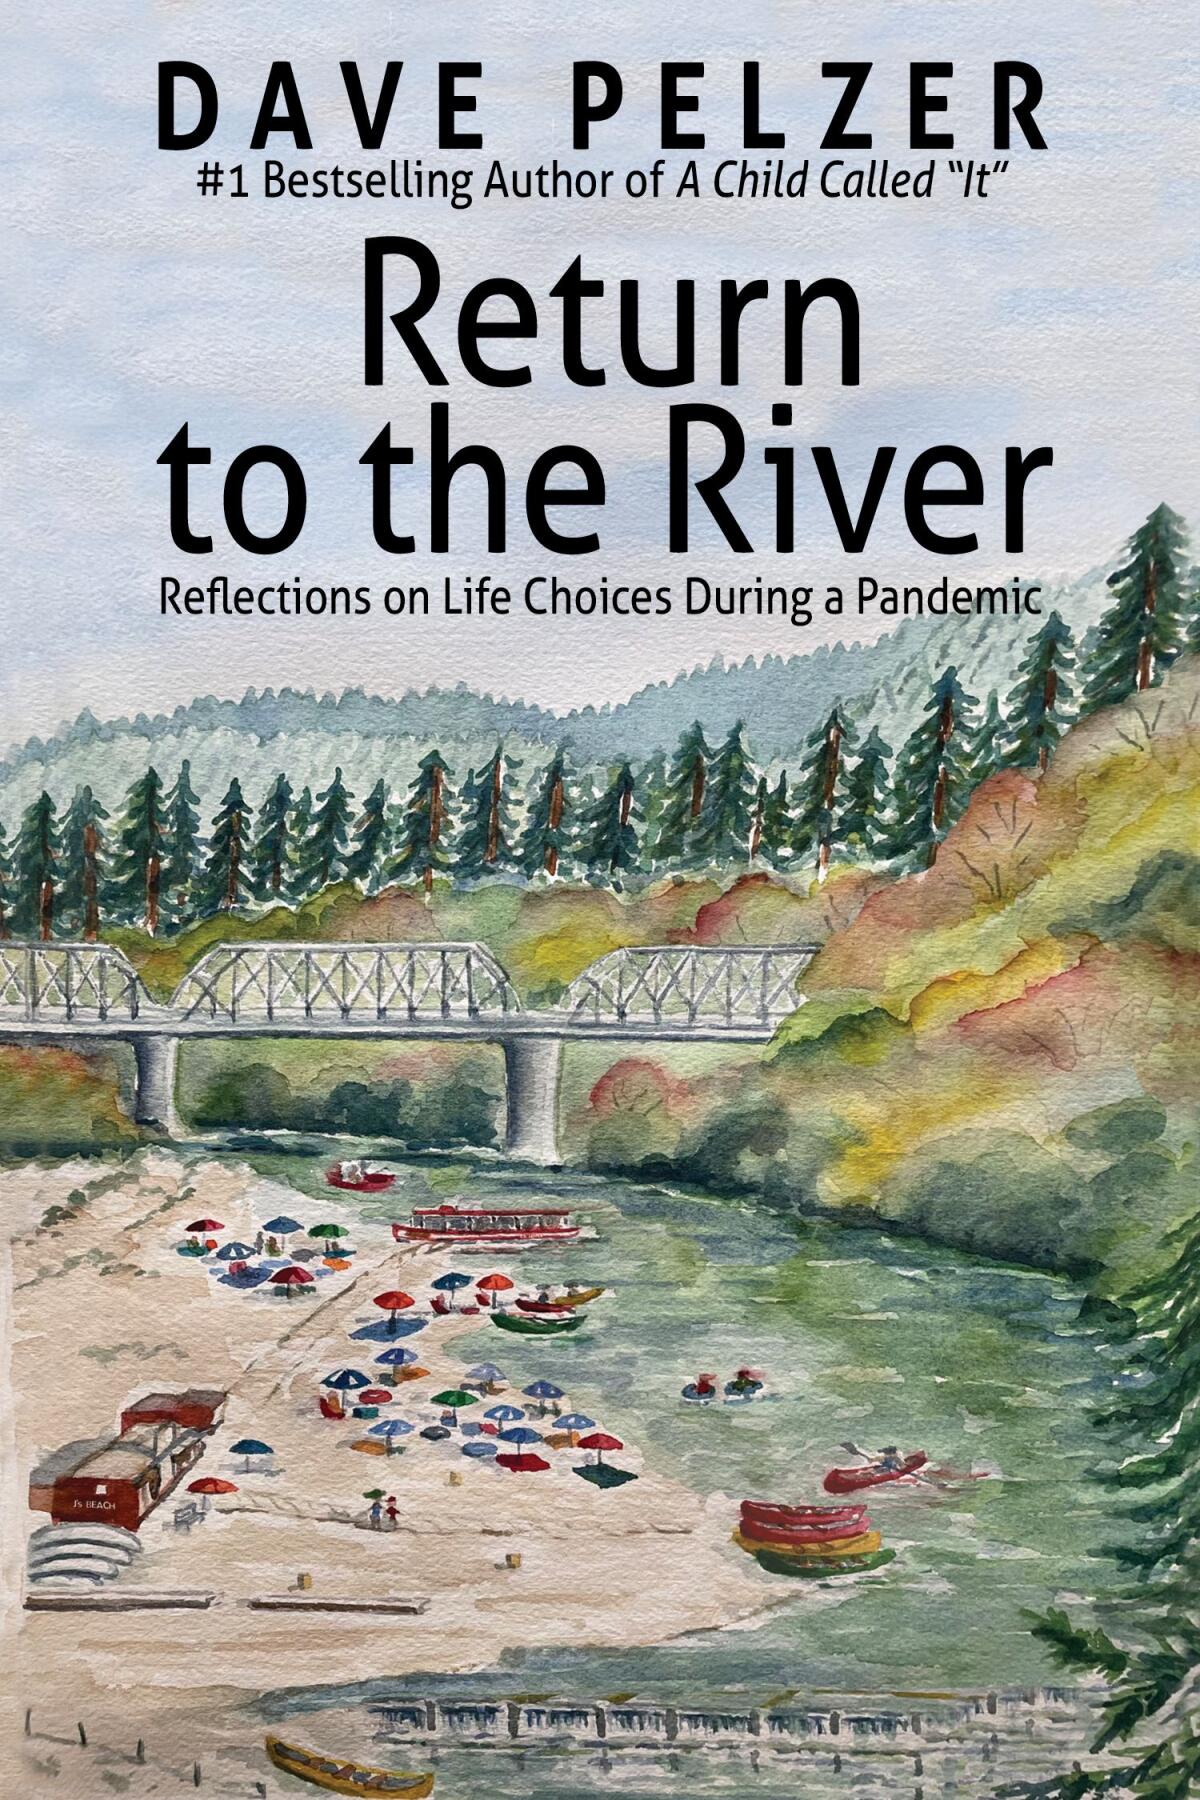 Child Called It' author Dave Pelzer writes about Russian River